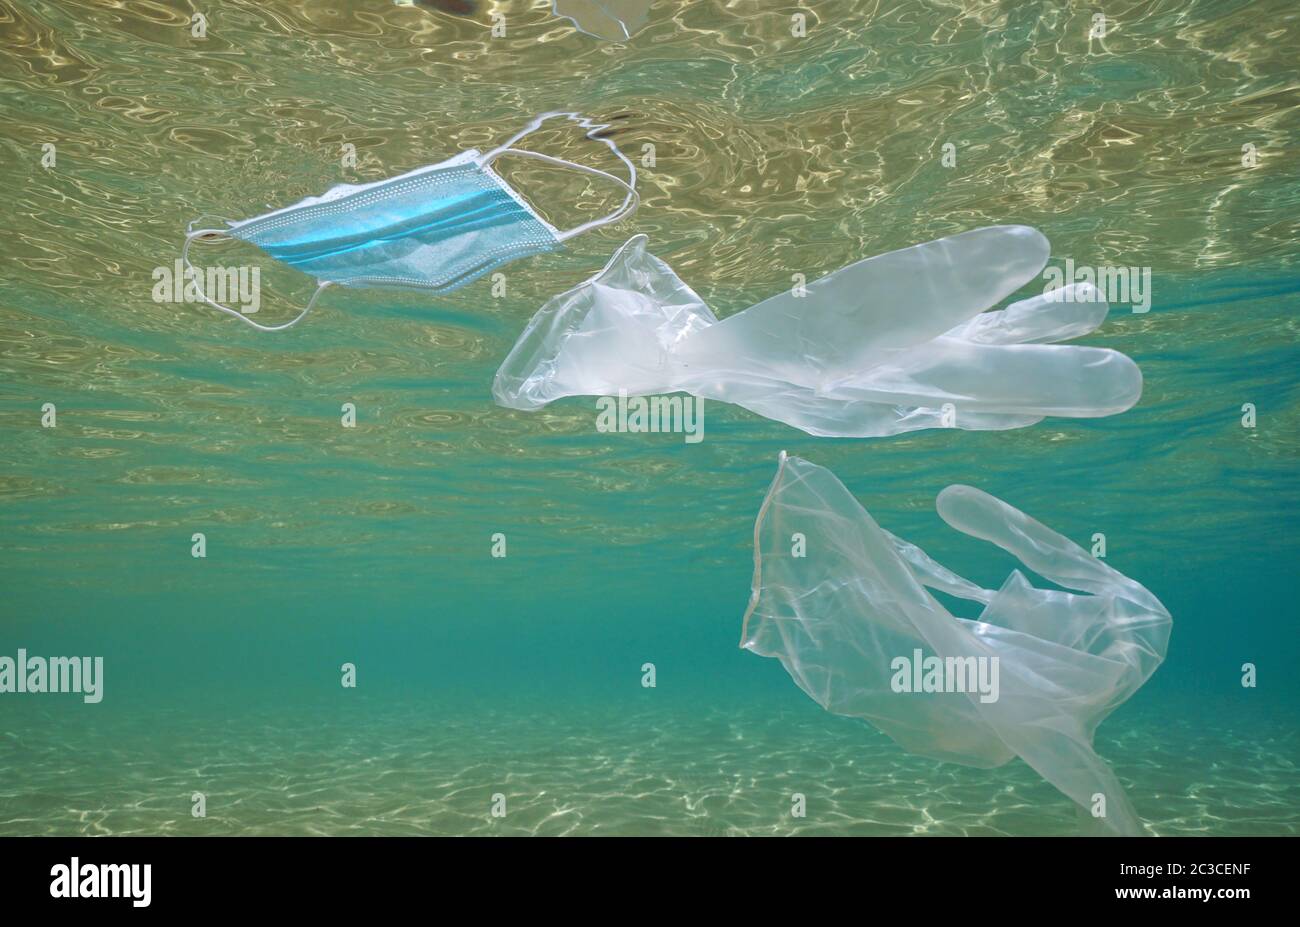 Gloves and face mask in the ocean, plastic waste pollution underwater since coronavirus COVID-19 pandemic Stock Photo